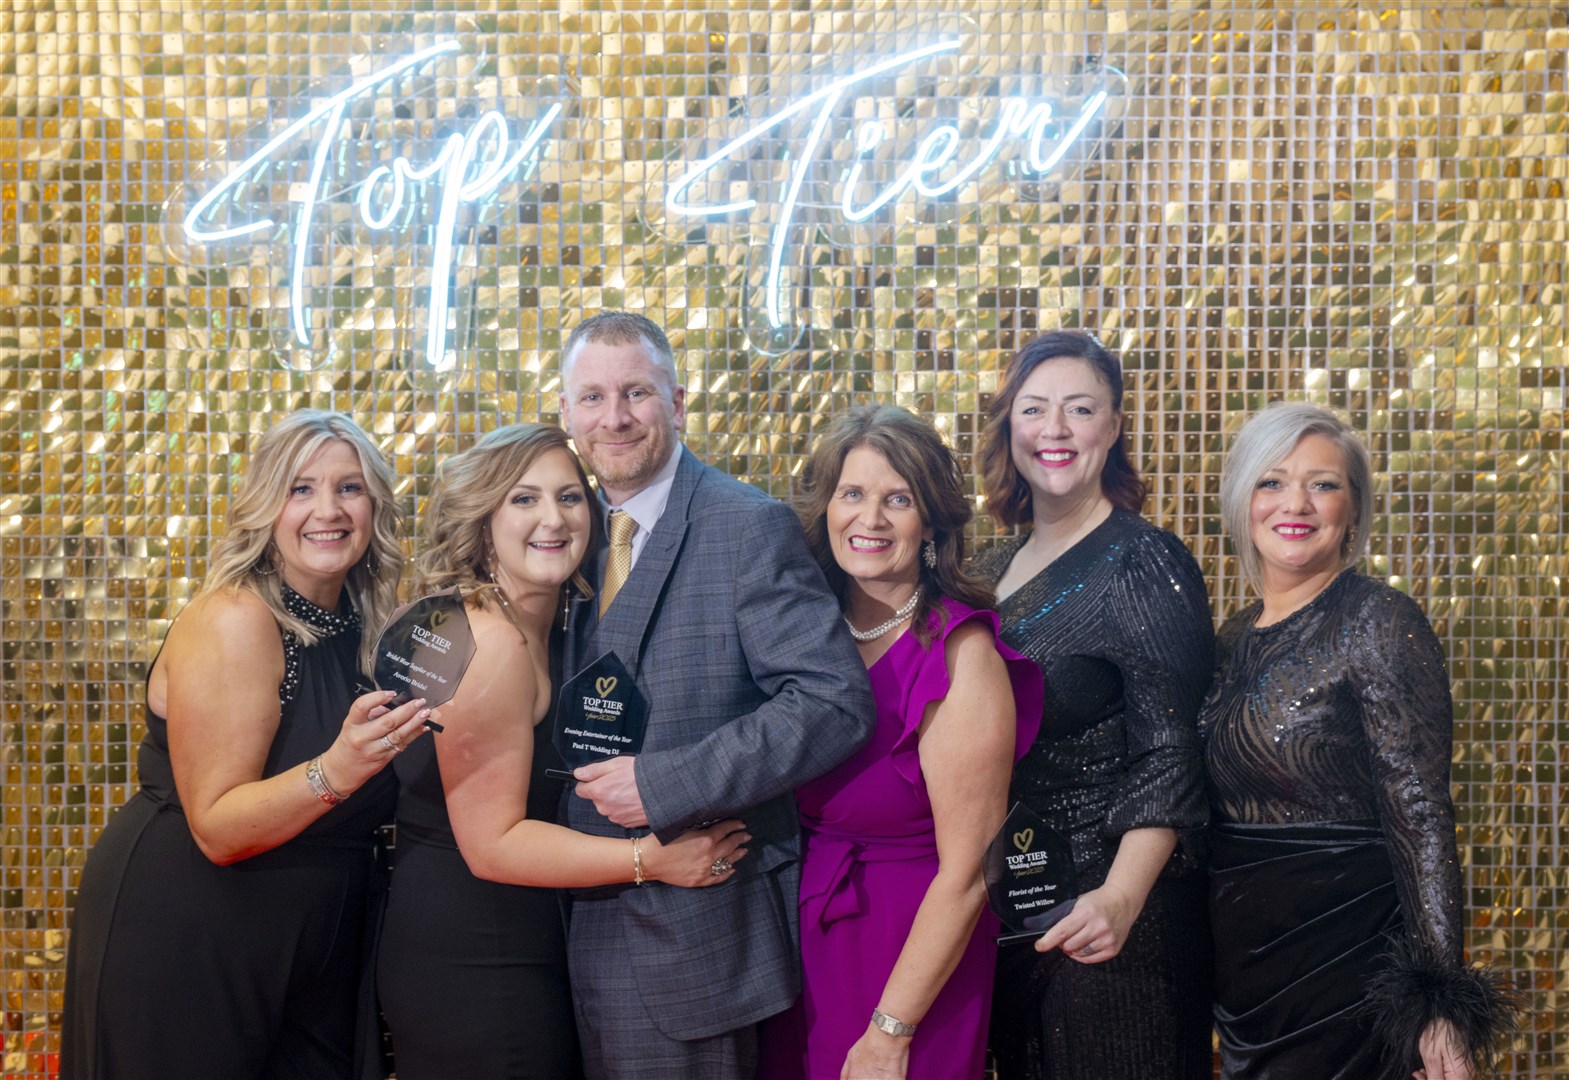 Proudly showing off their awards are (from left) Leigh-Anne Murray (Avorio), Gemma Innes (Avorio), Paul Tough, Sonia Pozzi (Avorio), Caroline Holmes (Twisted Willow) Ashley Smith. Picture: Photography by aberdeenphoto.com